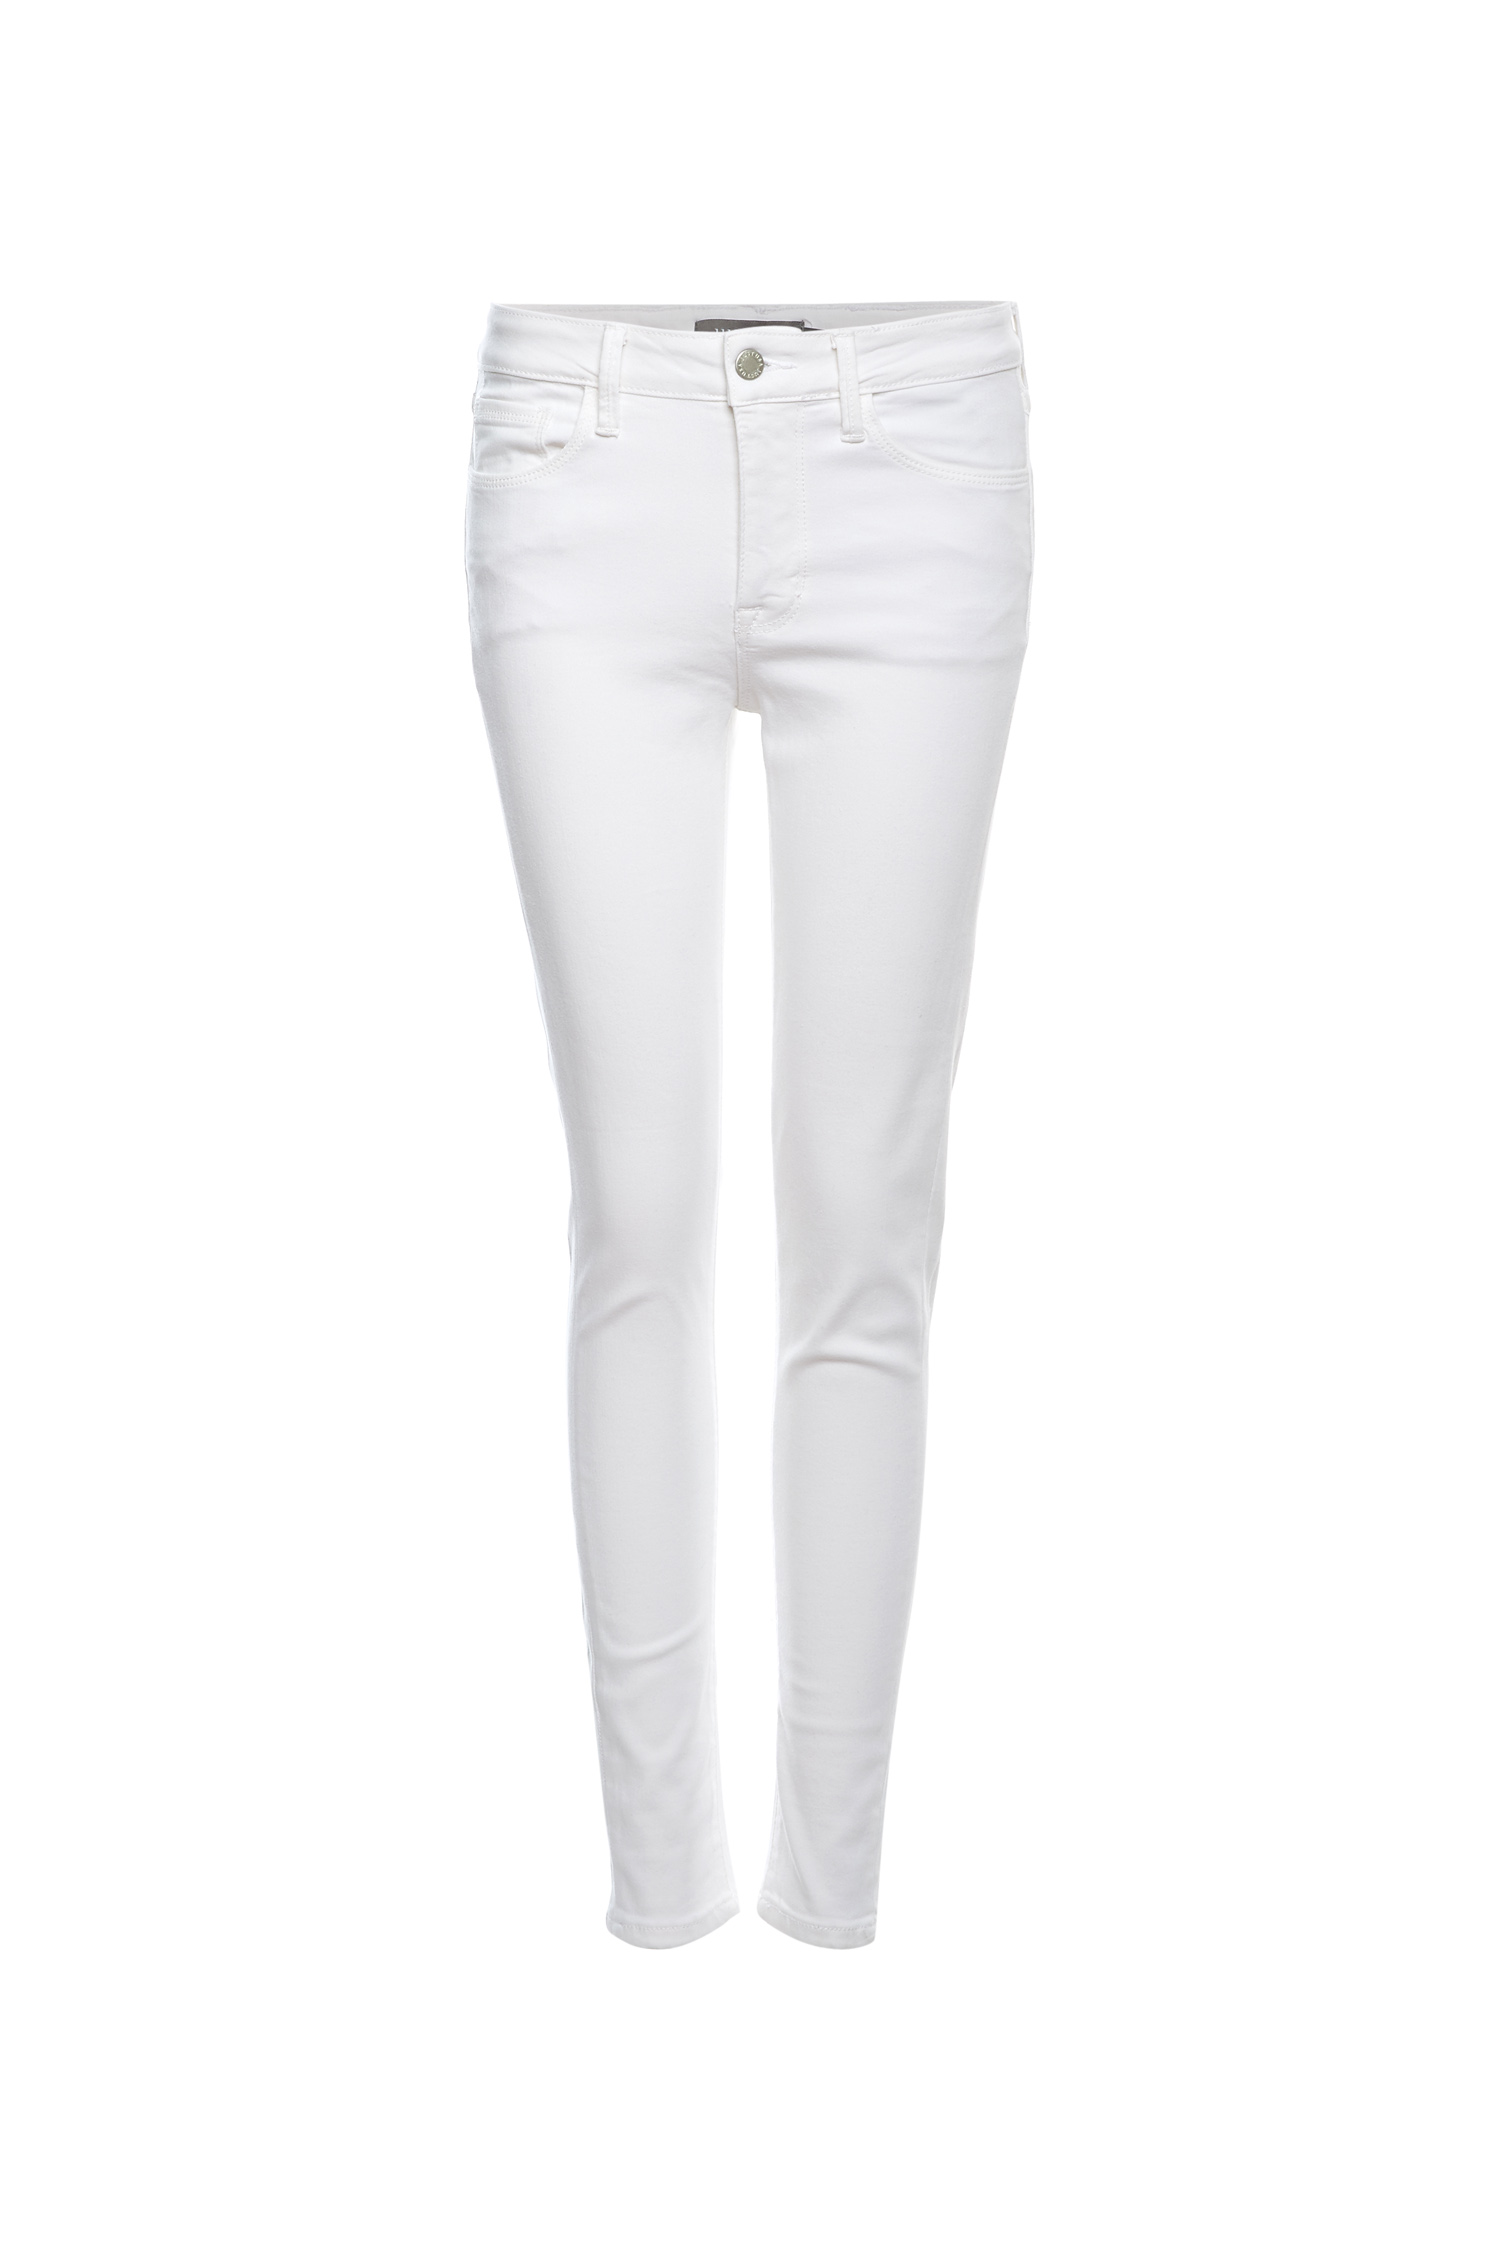 Just USA Mid Rise Skinny in White 14 | DAILYLOOK